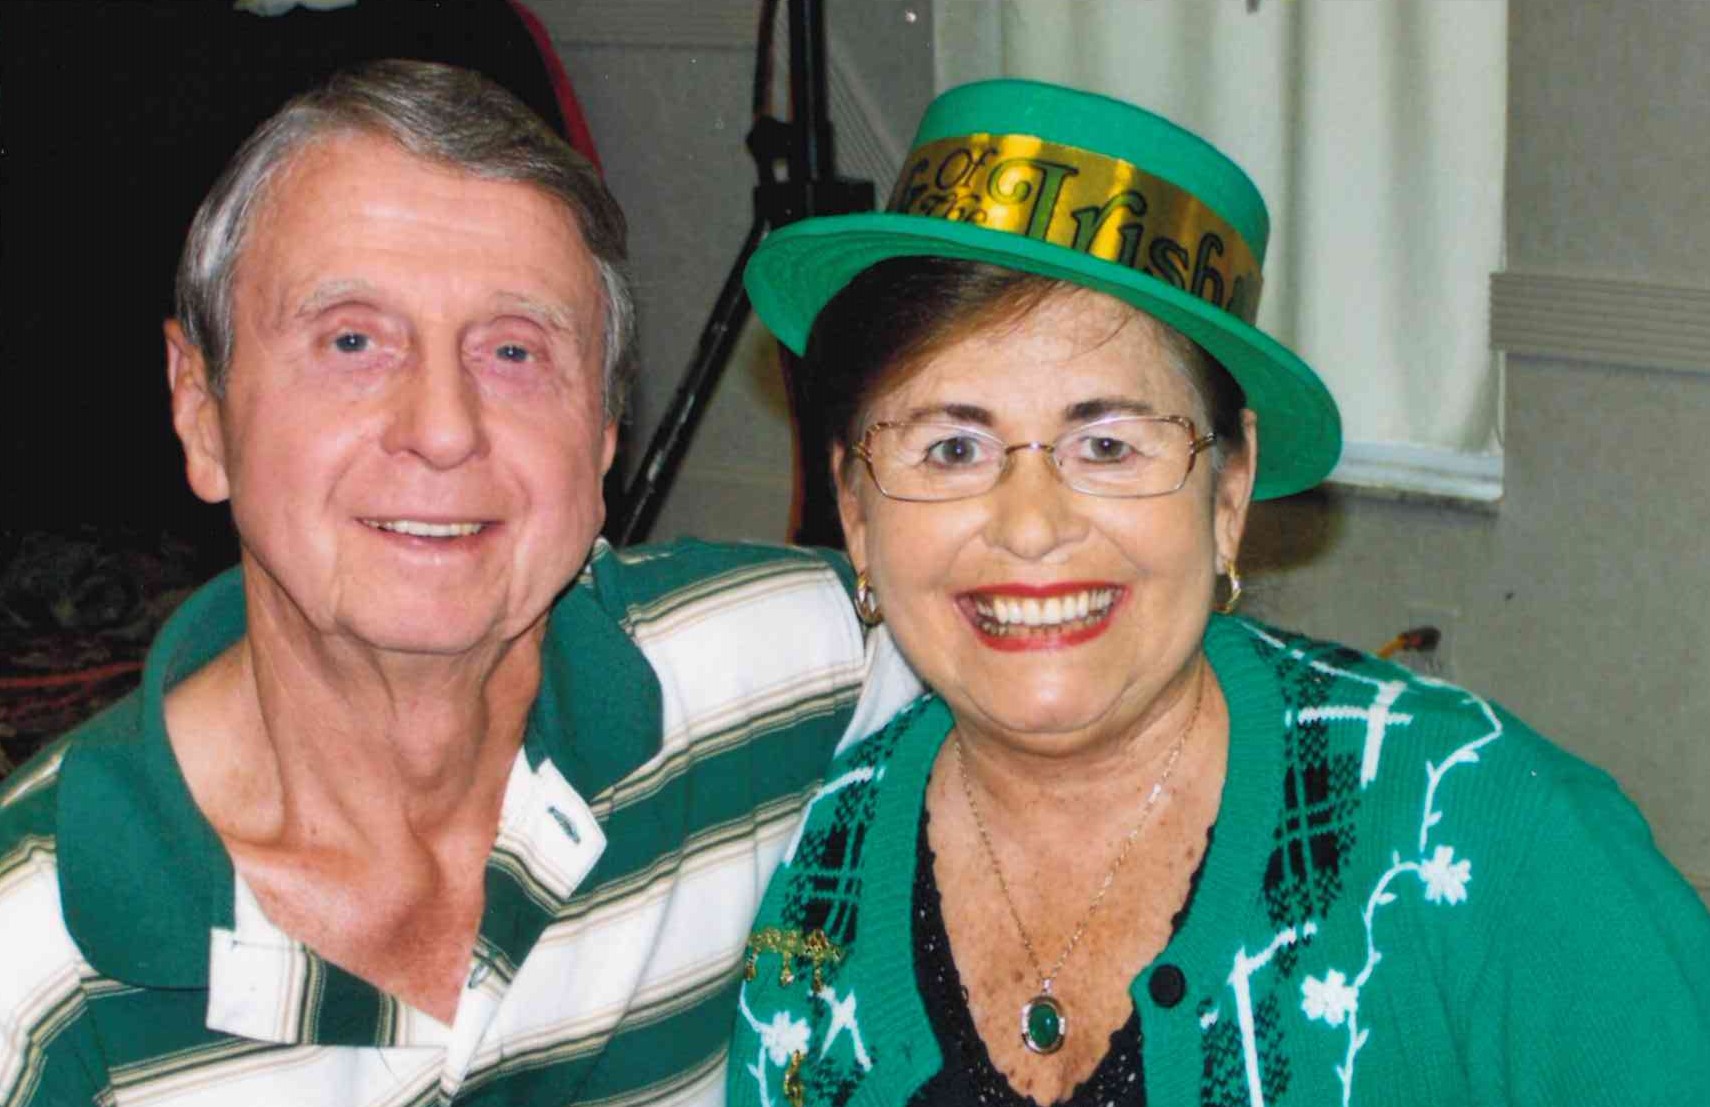 Happy St. Patrick's Day from George and Elaine!